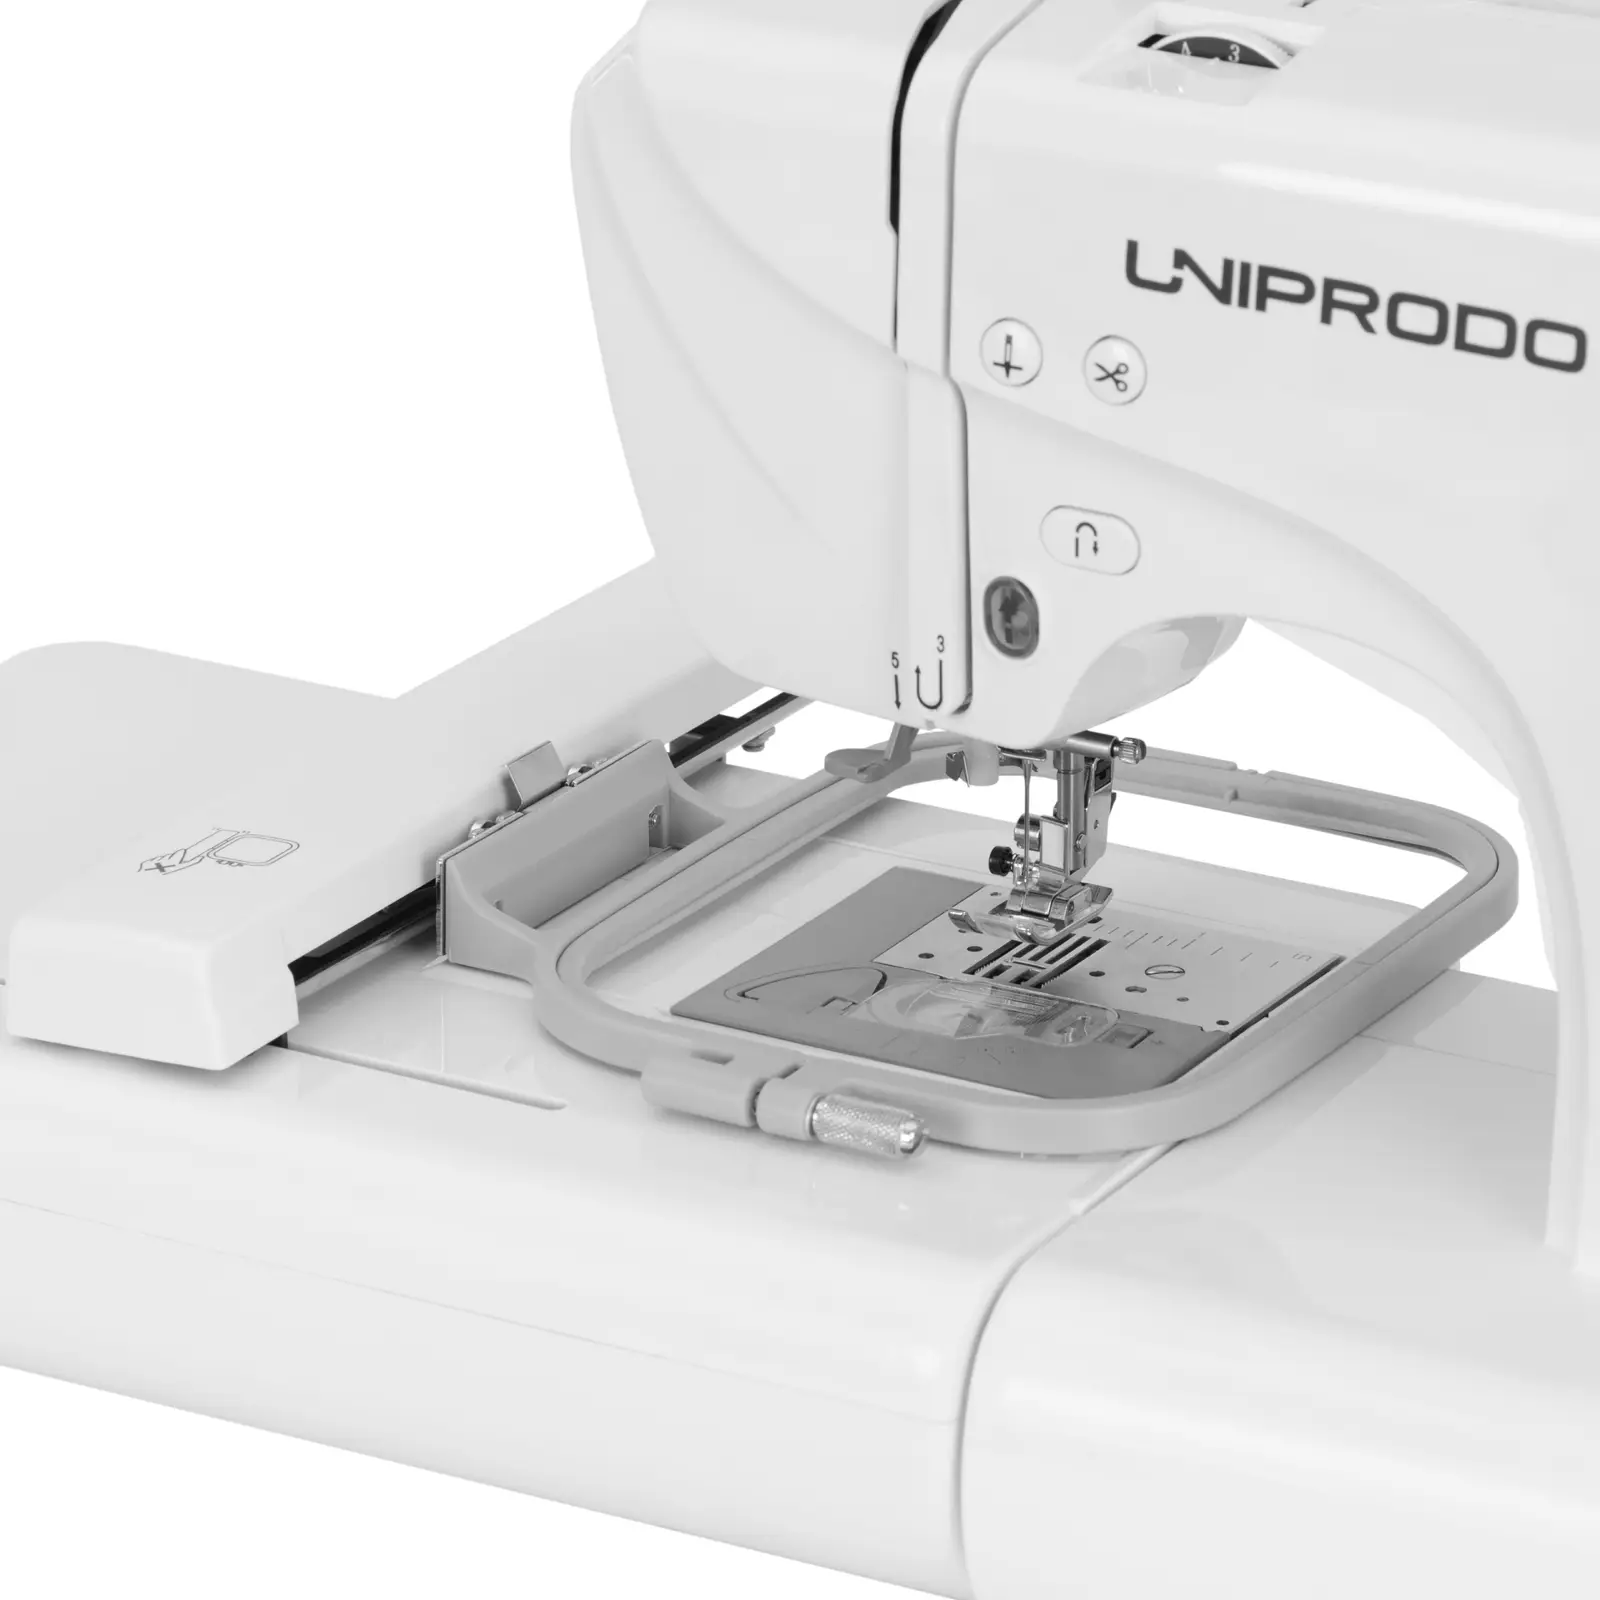 Sewing and Embroidery Machine - 160 stitches - 96 embroidery patterns - touch LCD